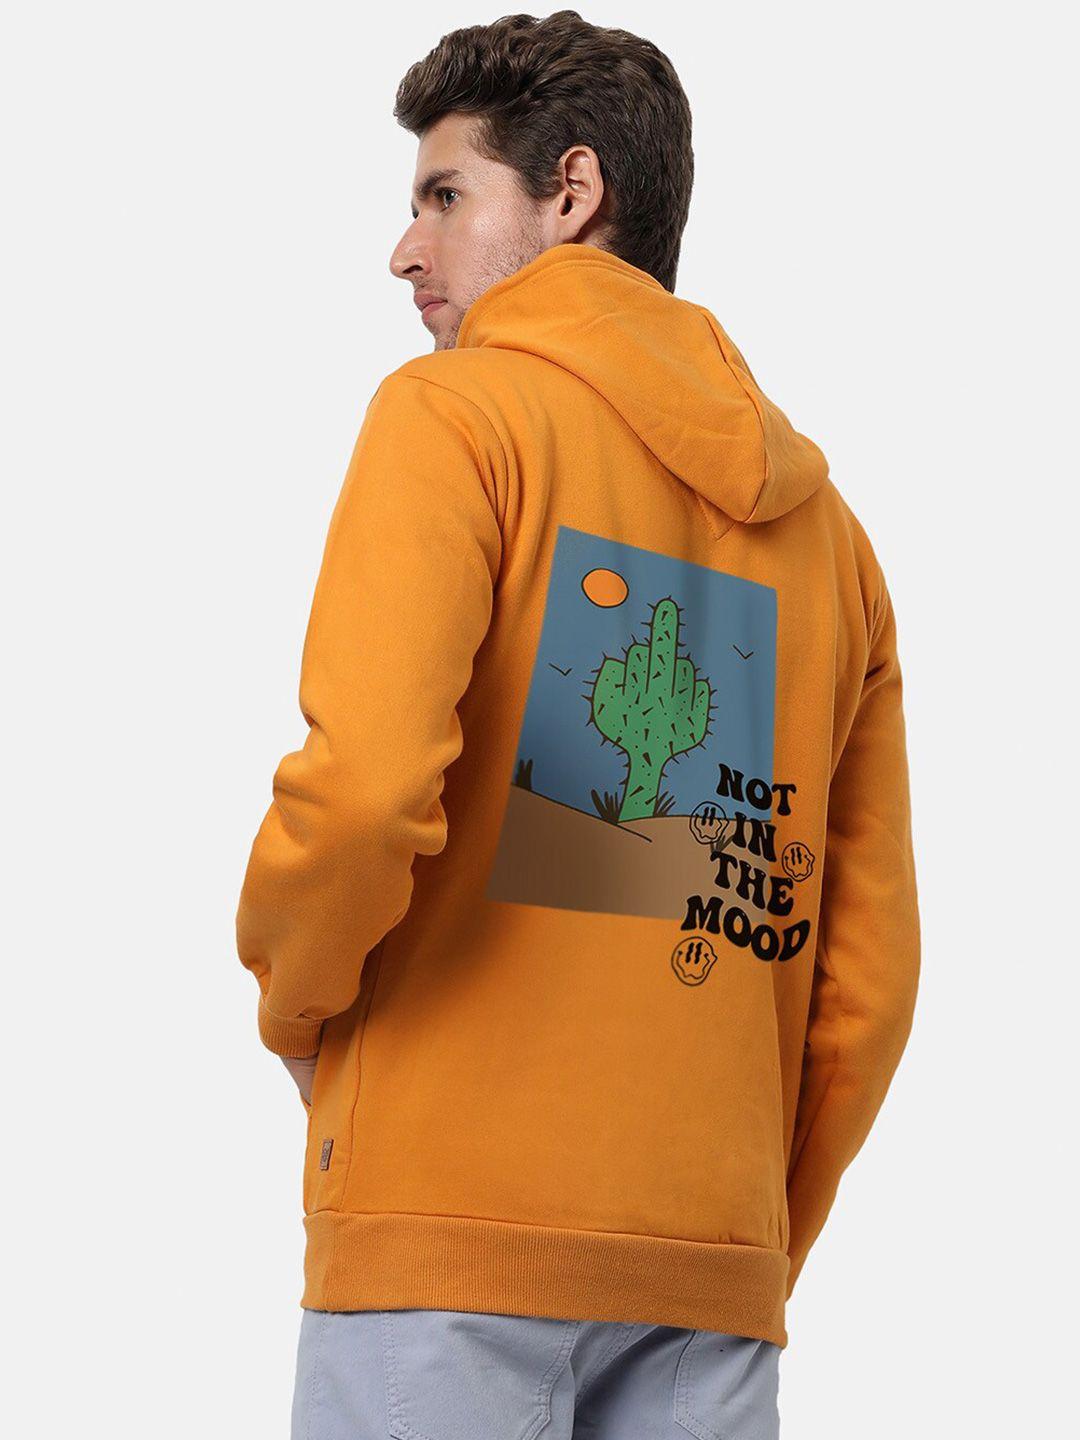 campus sutra graphic printed hooded cotton sweatshirt